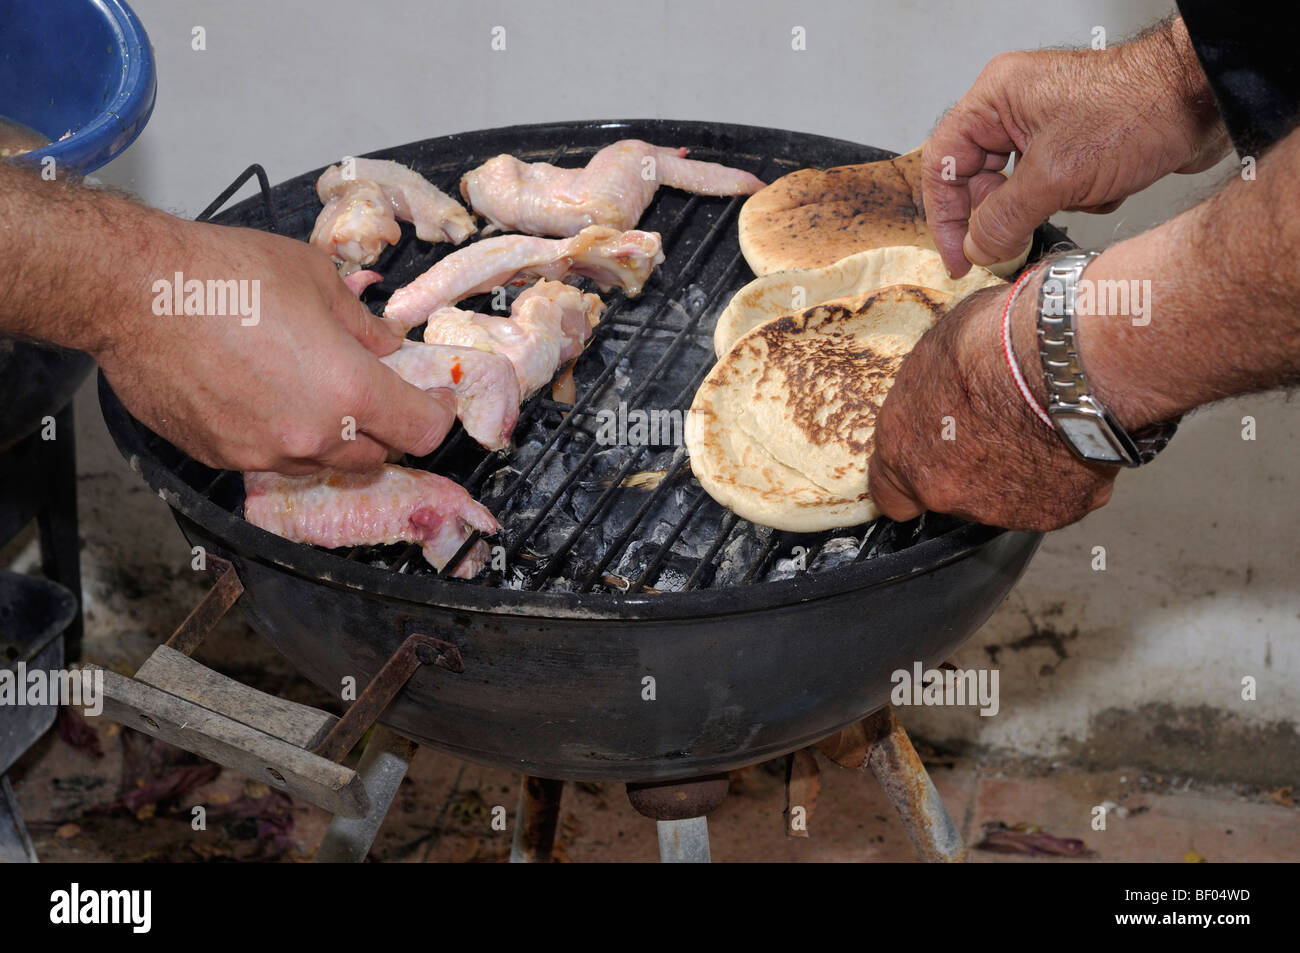 Cooking chicken wings on a barbecue Stock Photo